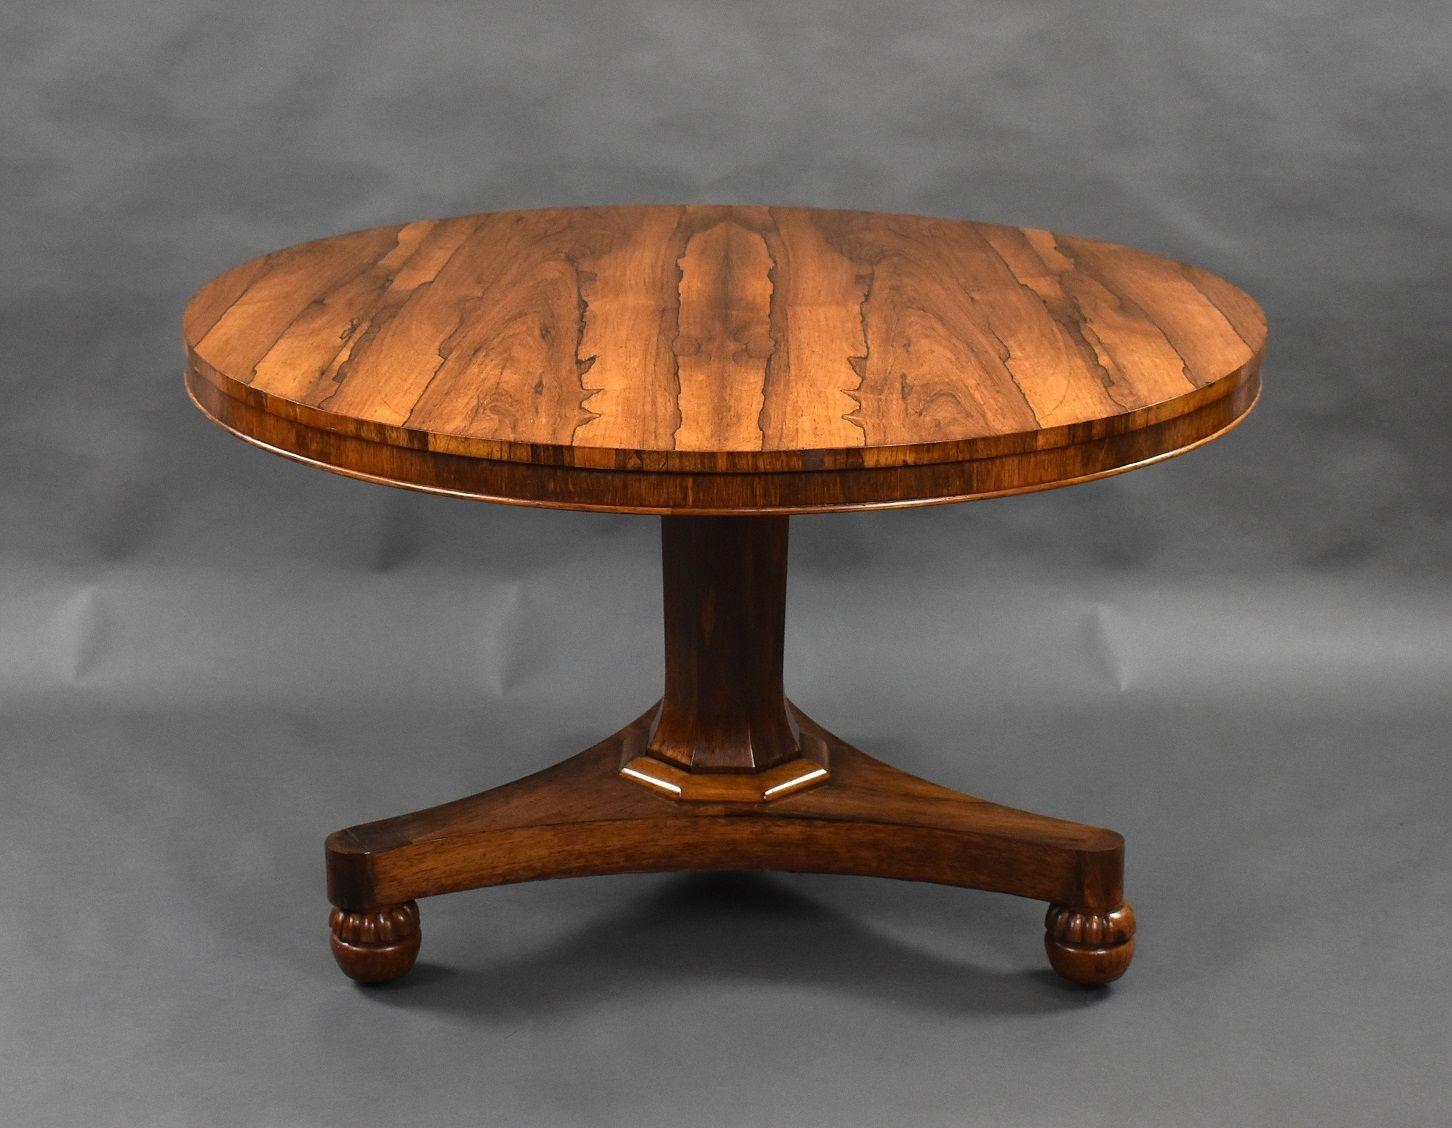 For sale is a good quality Victorian rosewood breakfast table, having a well figured top above a tapered stem, terminating on its base, raised on bun feet. The table is in very good condition, showing minor signs of wear commensurate with age and